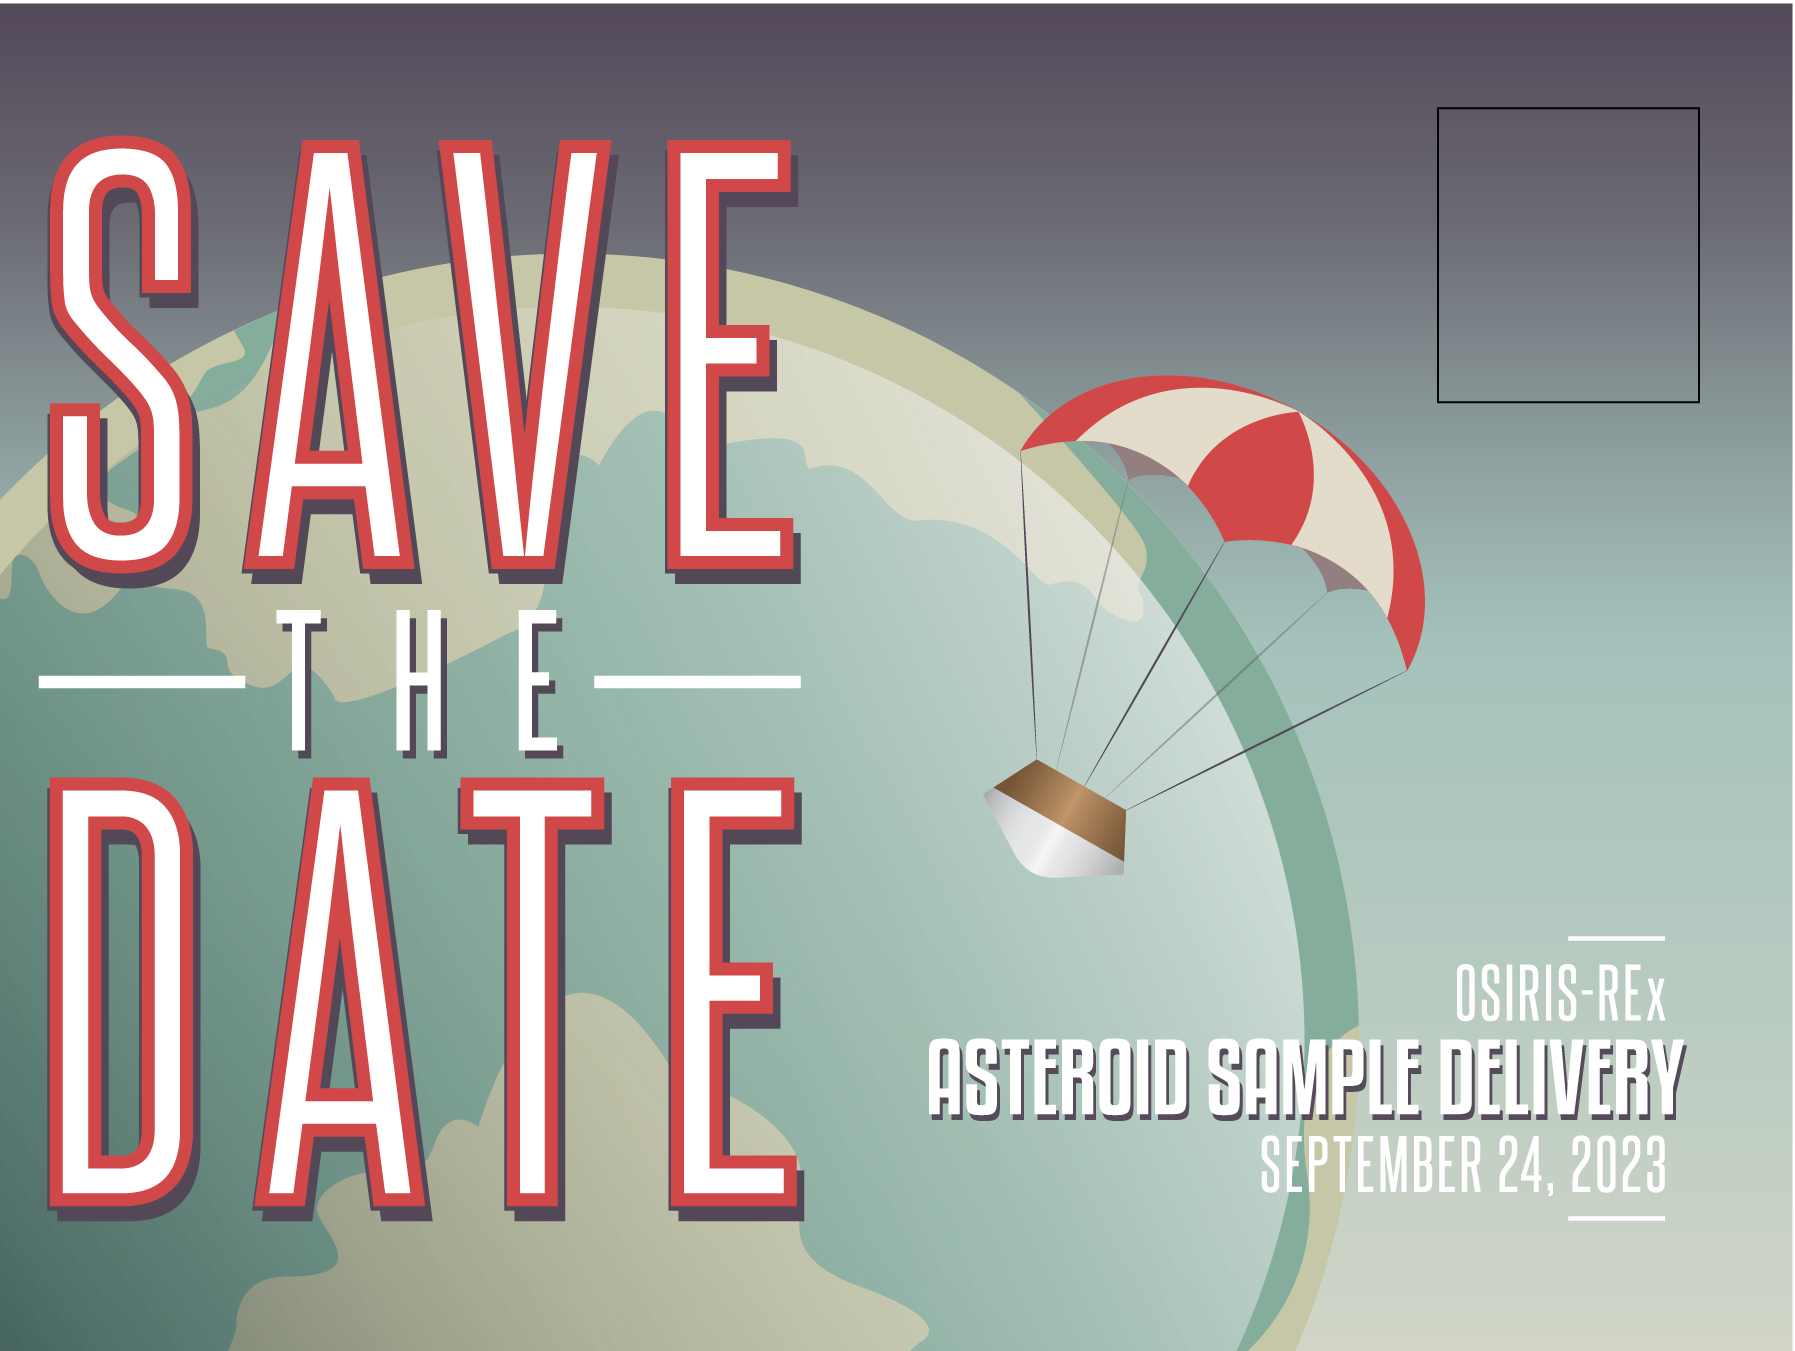 A save the date postcard for the asteroid sample delivery on Sept. 24, 2023. Includes an image of a satellite falling to earth under a red and white parachute.